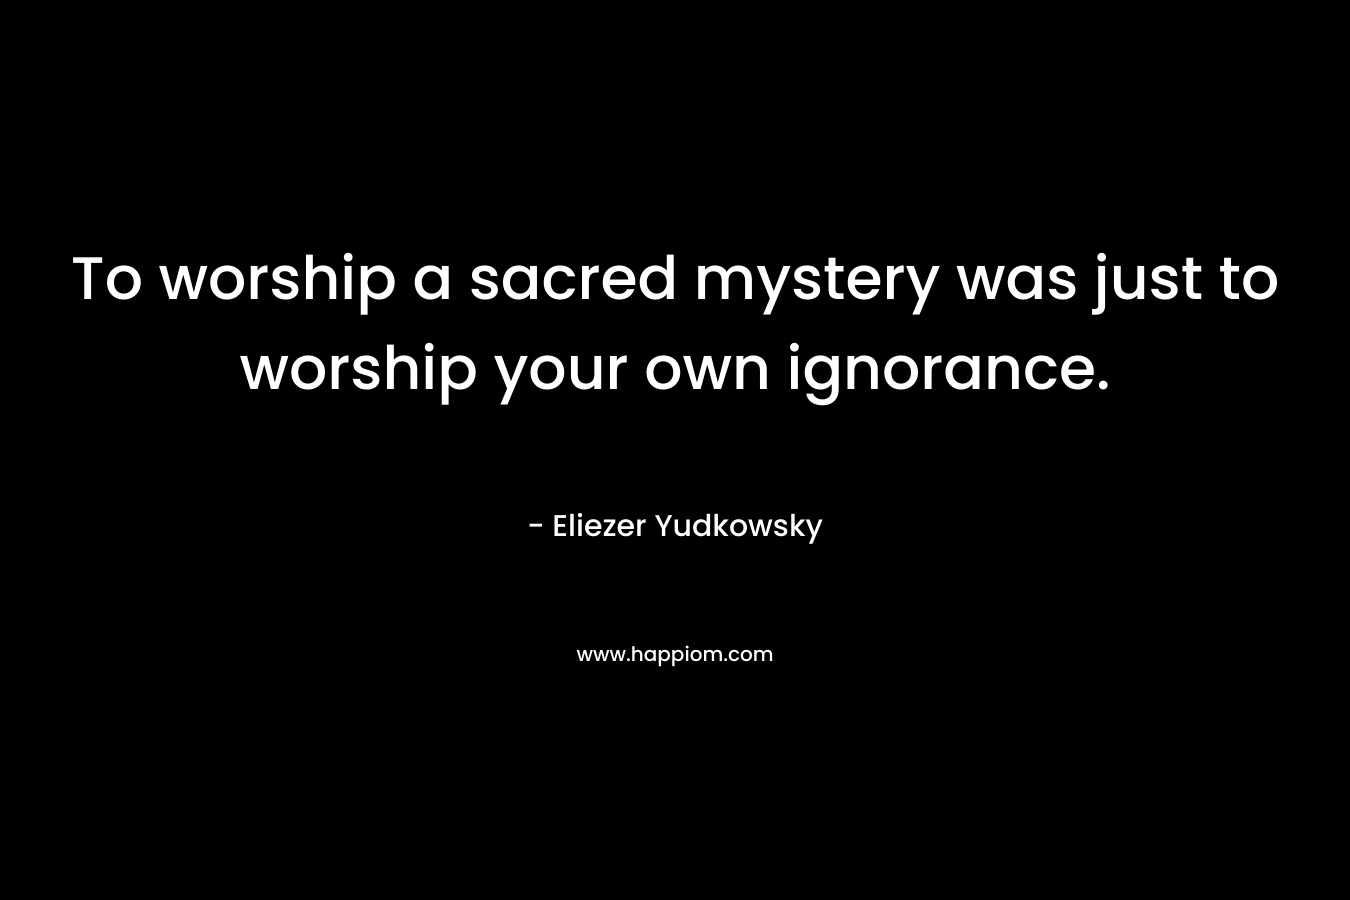 To worship a sacred mystery was just to worship your own ignorance. – Eliezer Yudkowsky